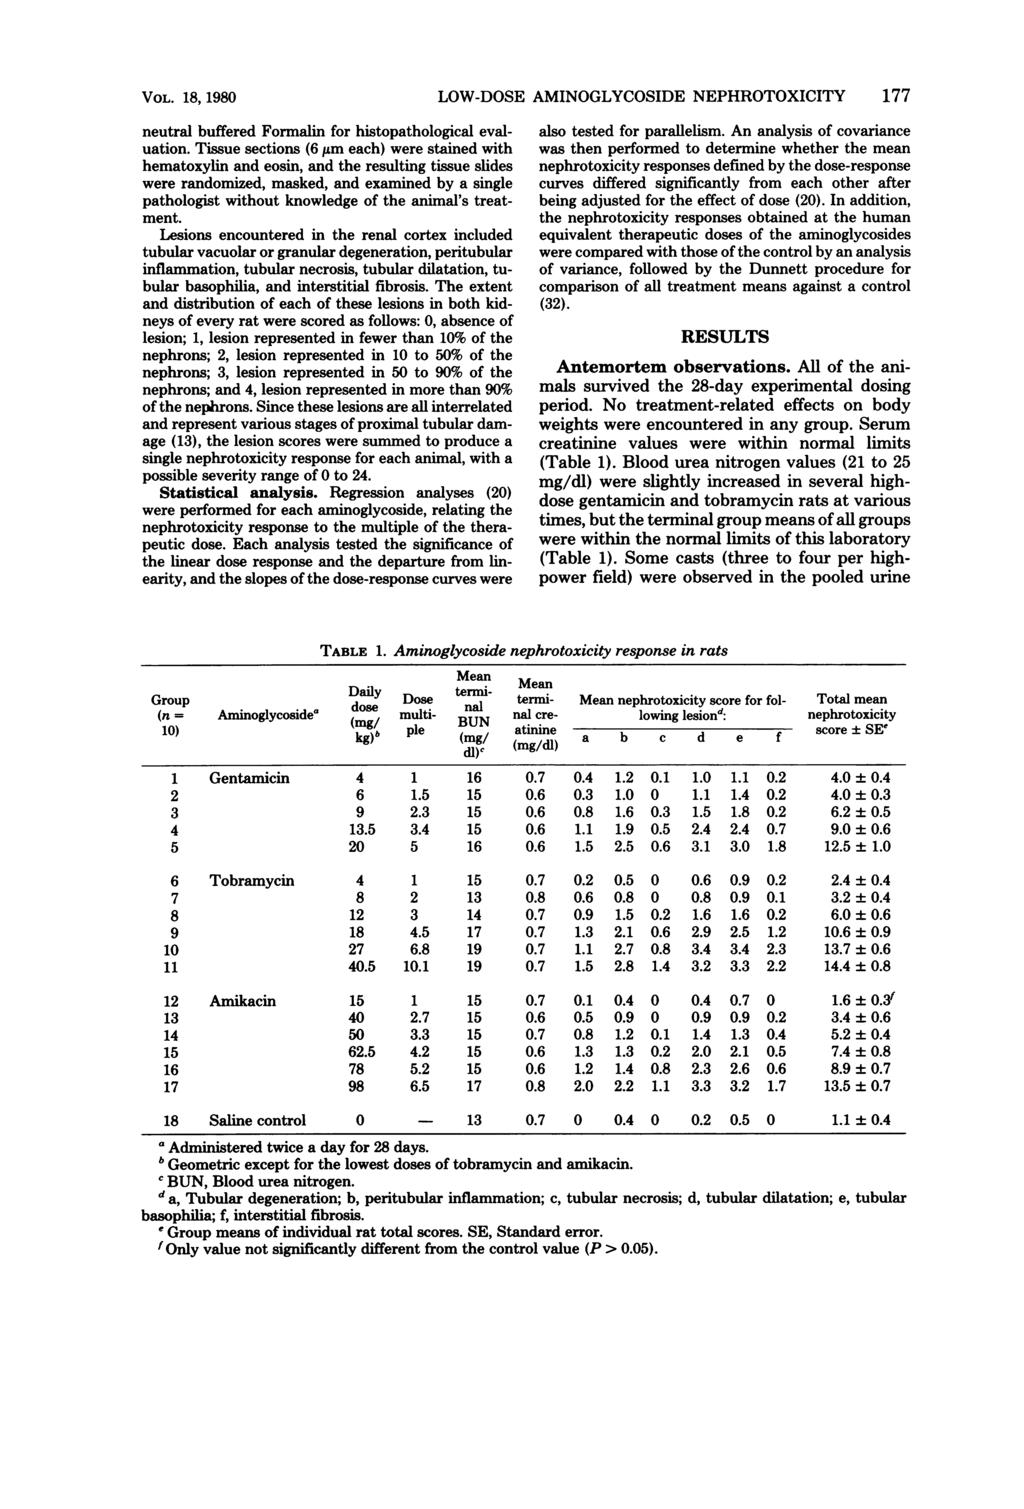 VOL. 18, 1980 neutral buffered Formalin for histopathological evaluation.